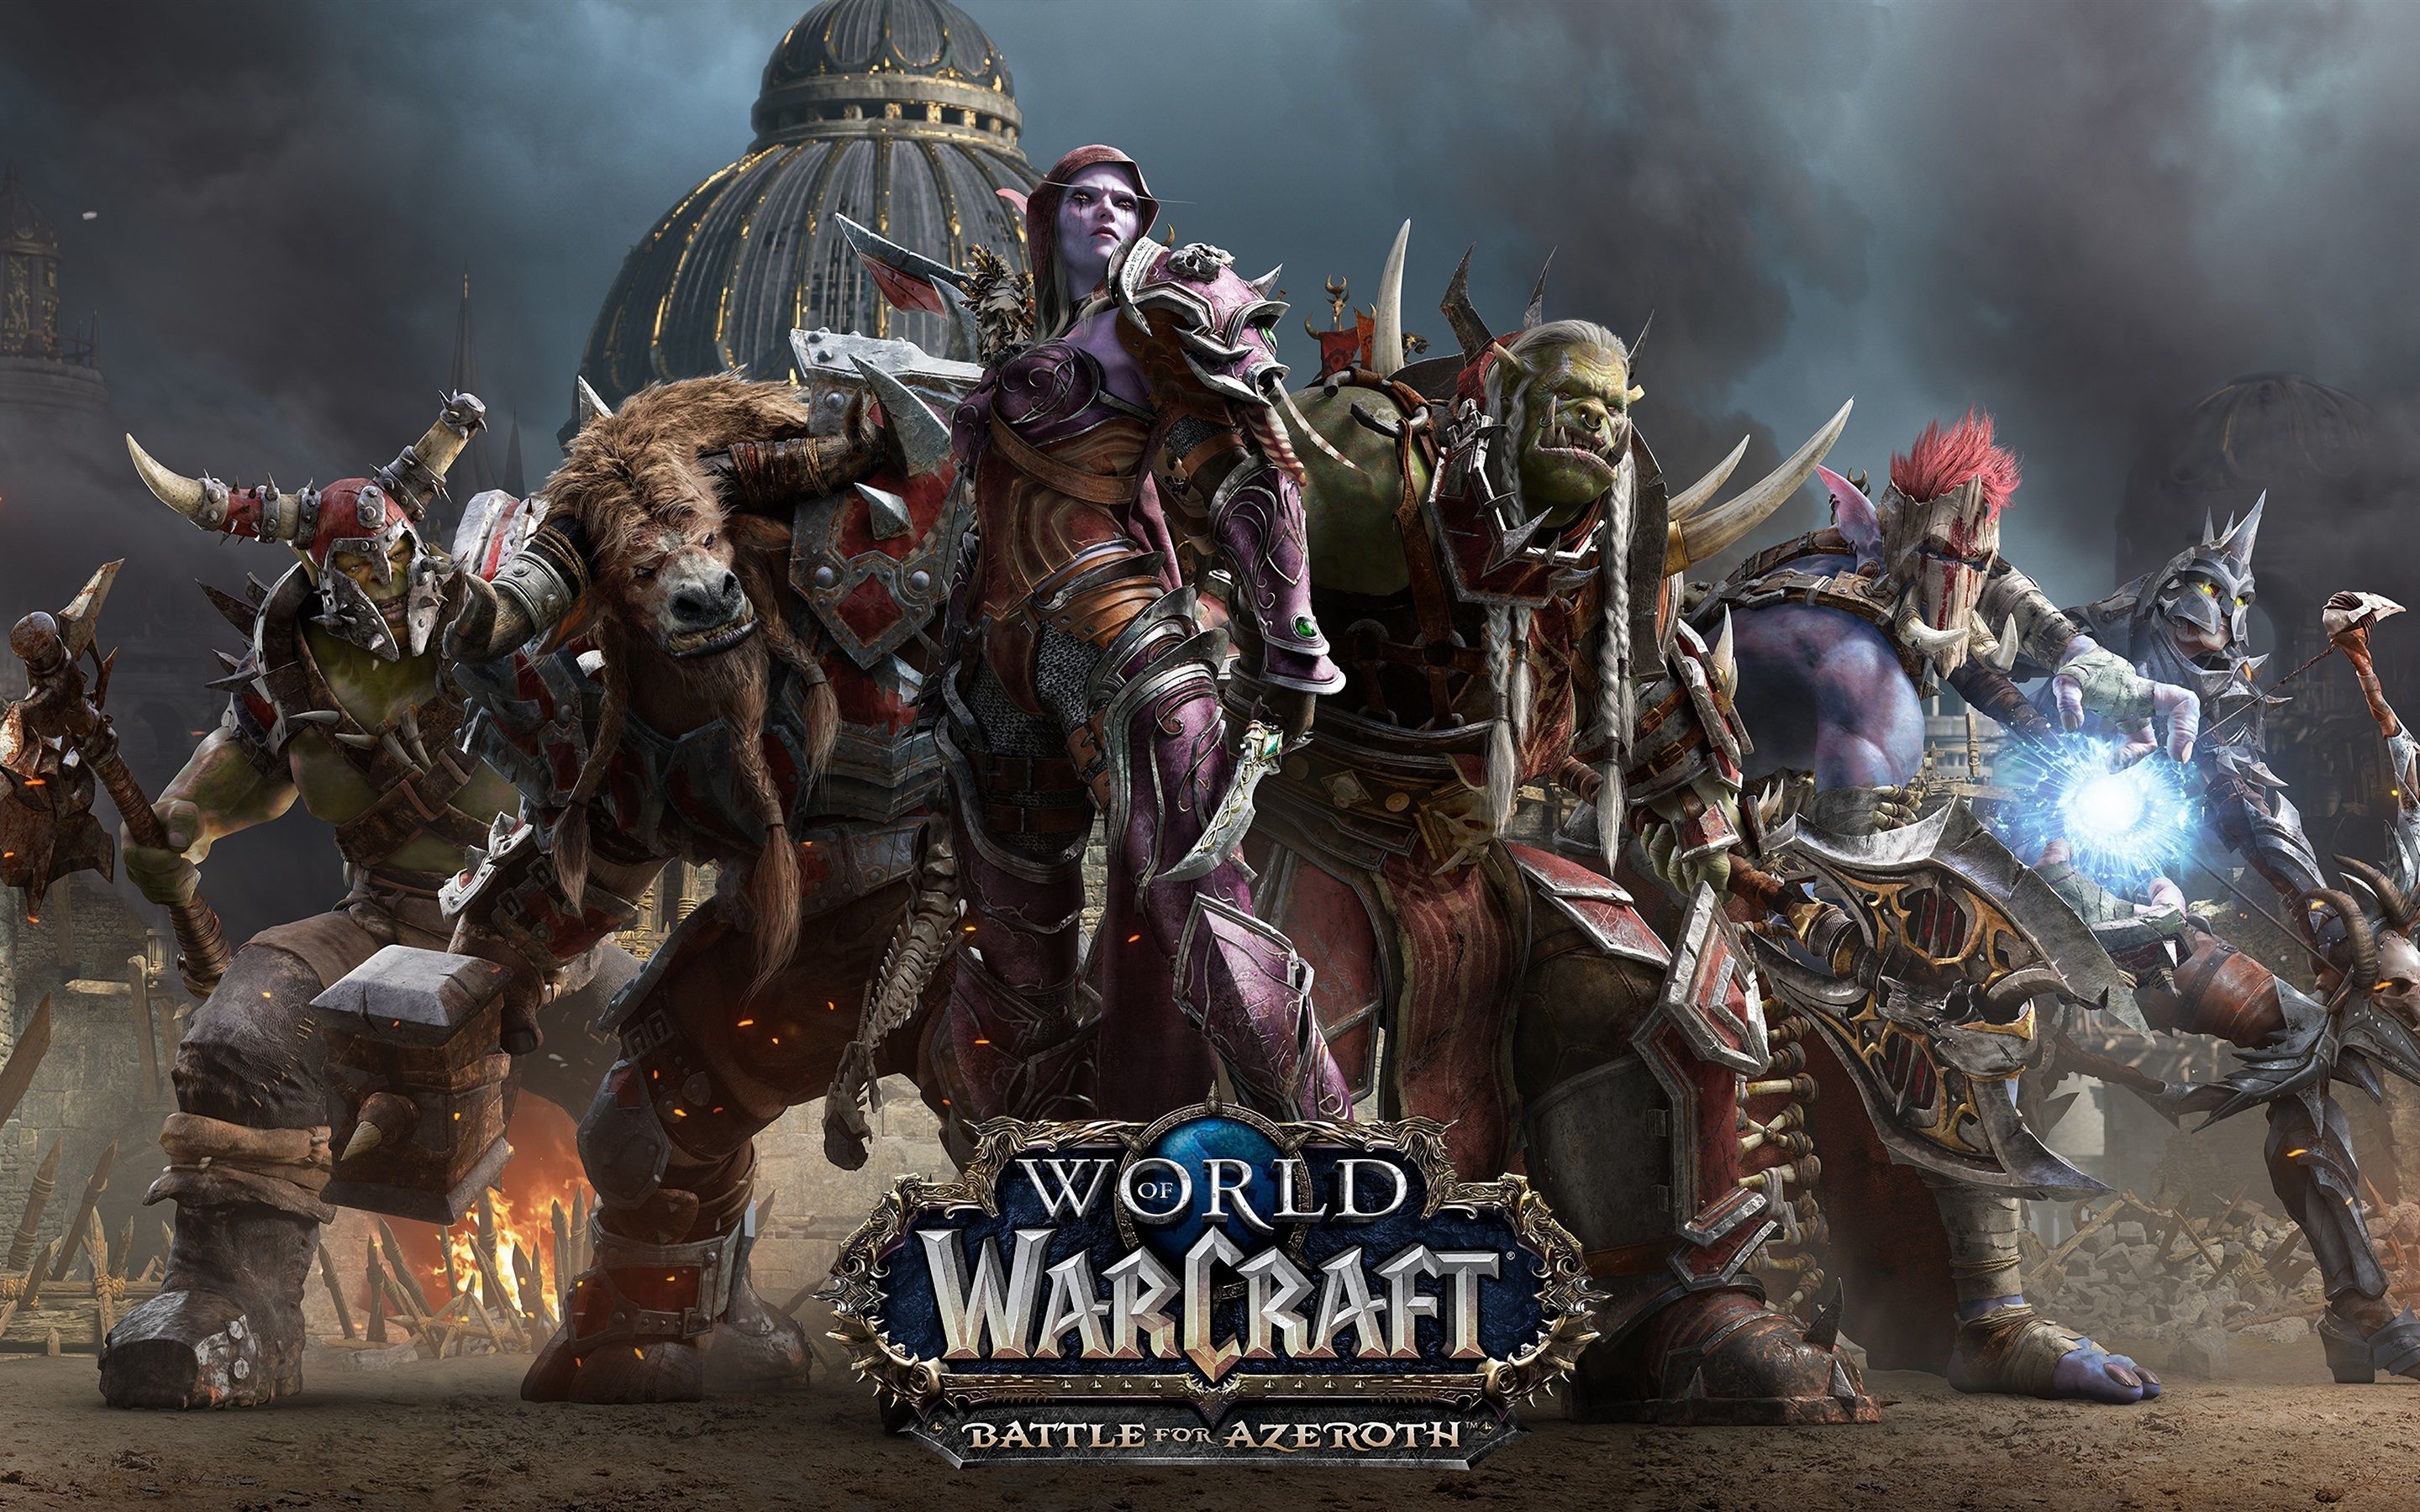 Wallpaper World of Warcraft: Battle for Azeroth, hot game 3840x2160 UHD 4K Picture, Image